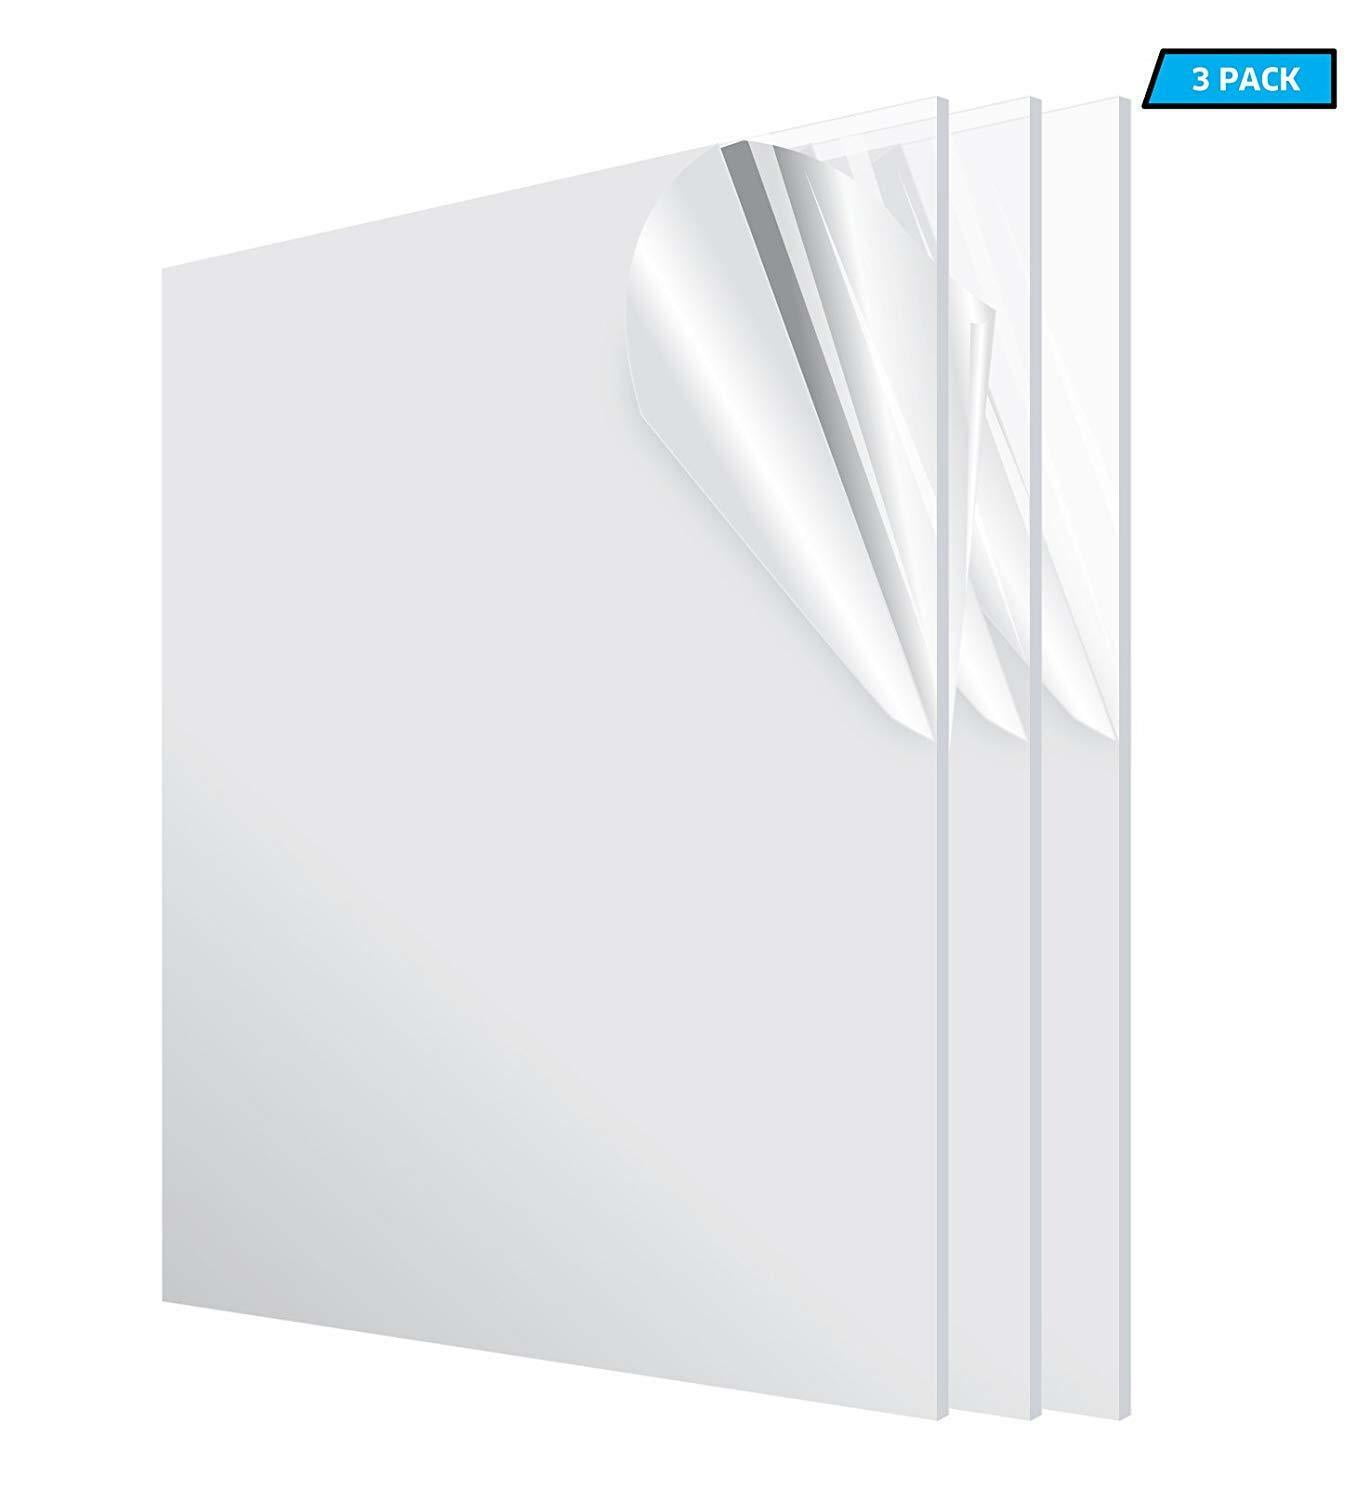 1/8 inch thick 3-Pack AdirOffice Clear Acrylic Plexiglass Sheet 24 in x 24 in 